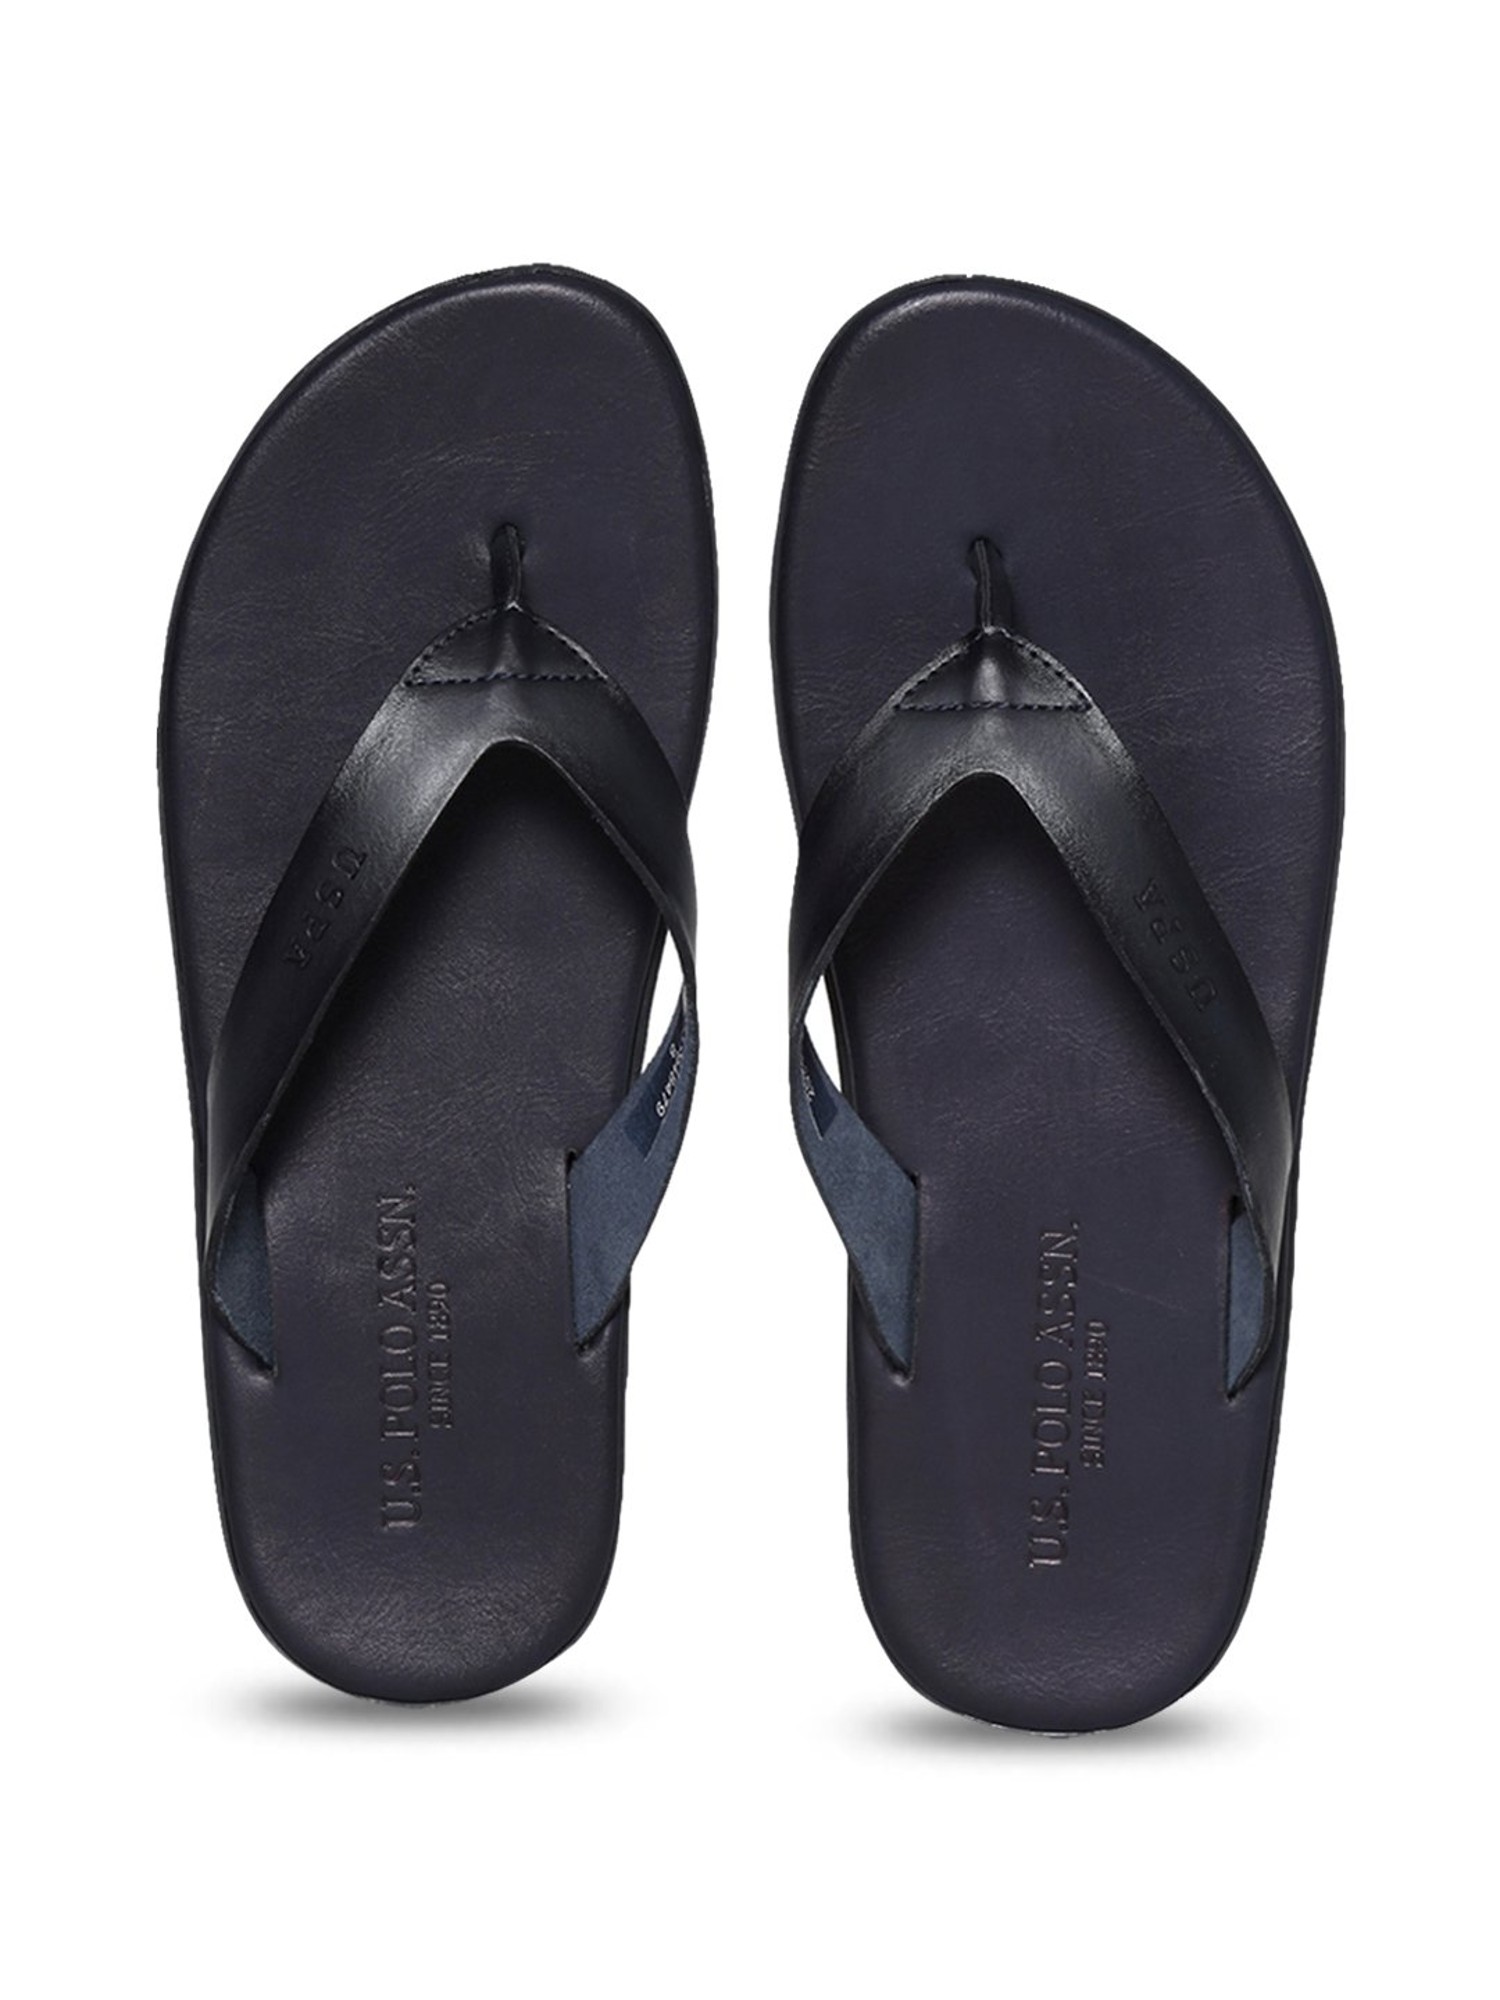 U.S.POLO.ASSN. Solid IRLING Black Slippers: Buy U.S.POLO.ASSN. Solid IRLING  Black Slippers Online at Best Price in India | NykaaMan